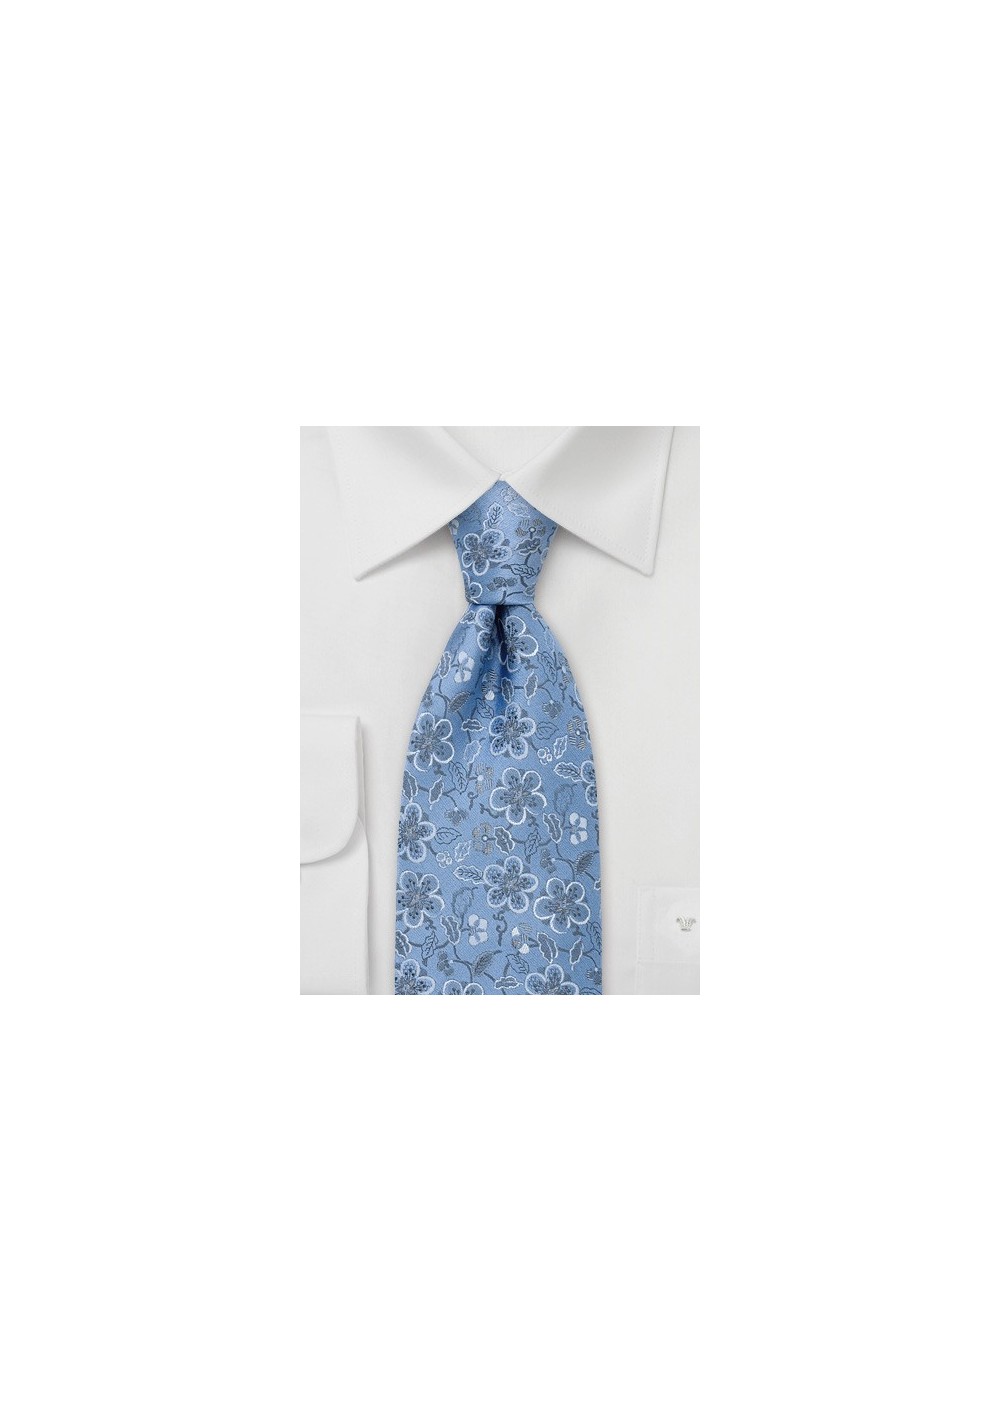 Blue Silk Tie by Chevalier With Floral Pattern